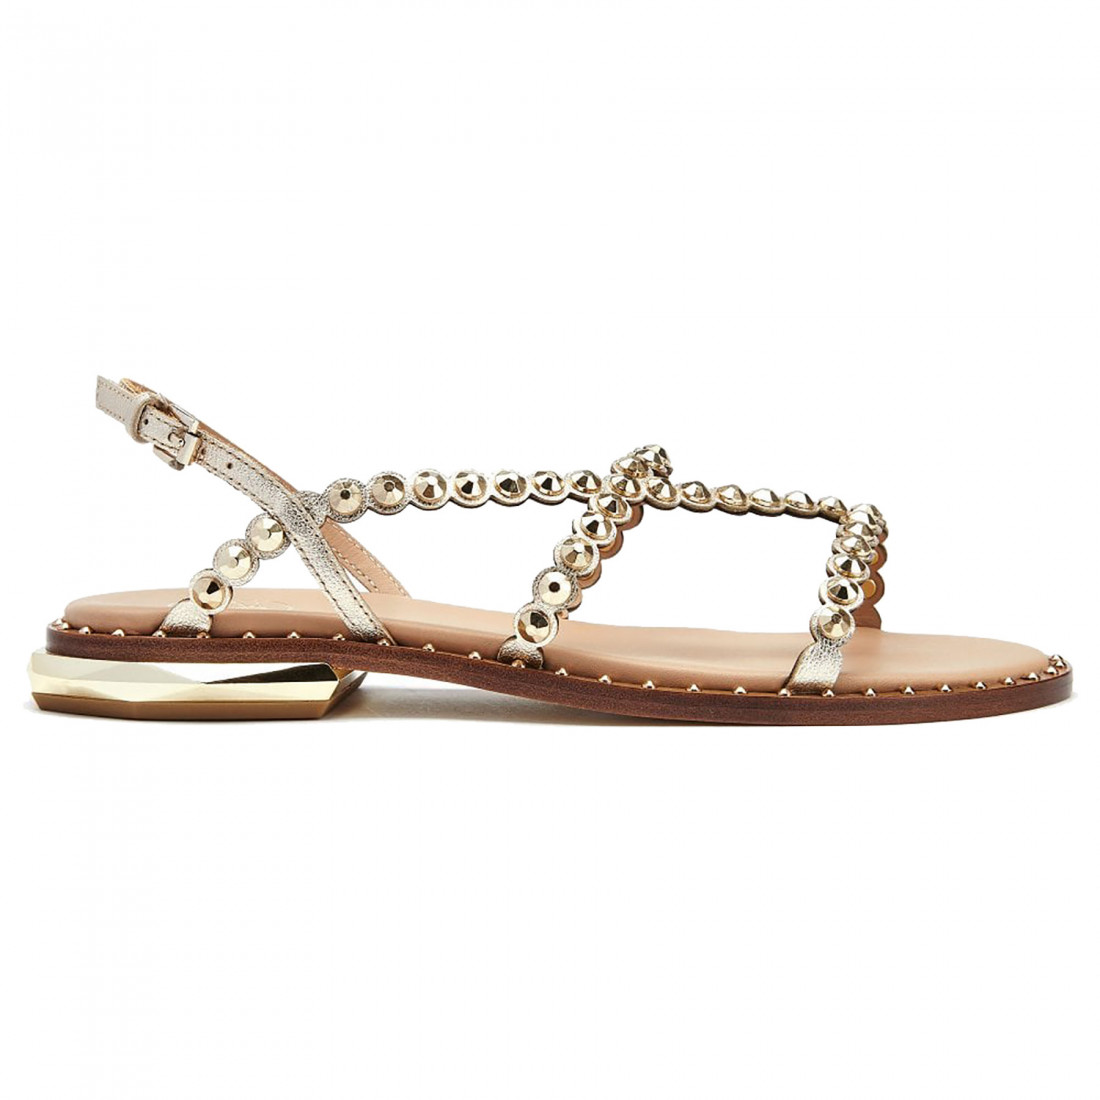 Ash Paola Sandal in gold leather with gold studs